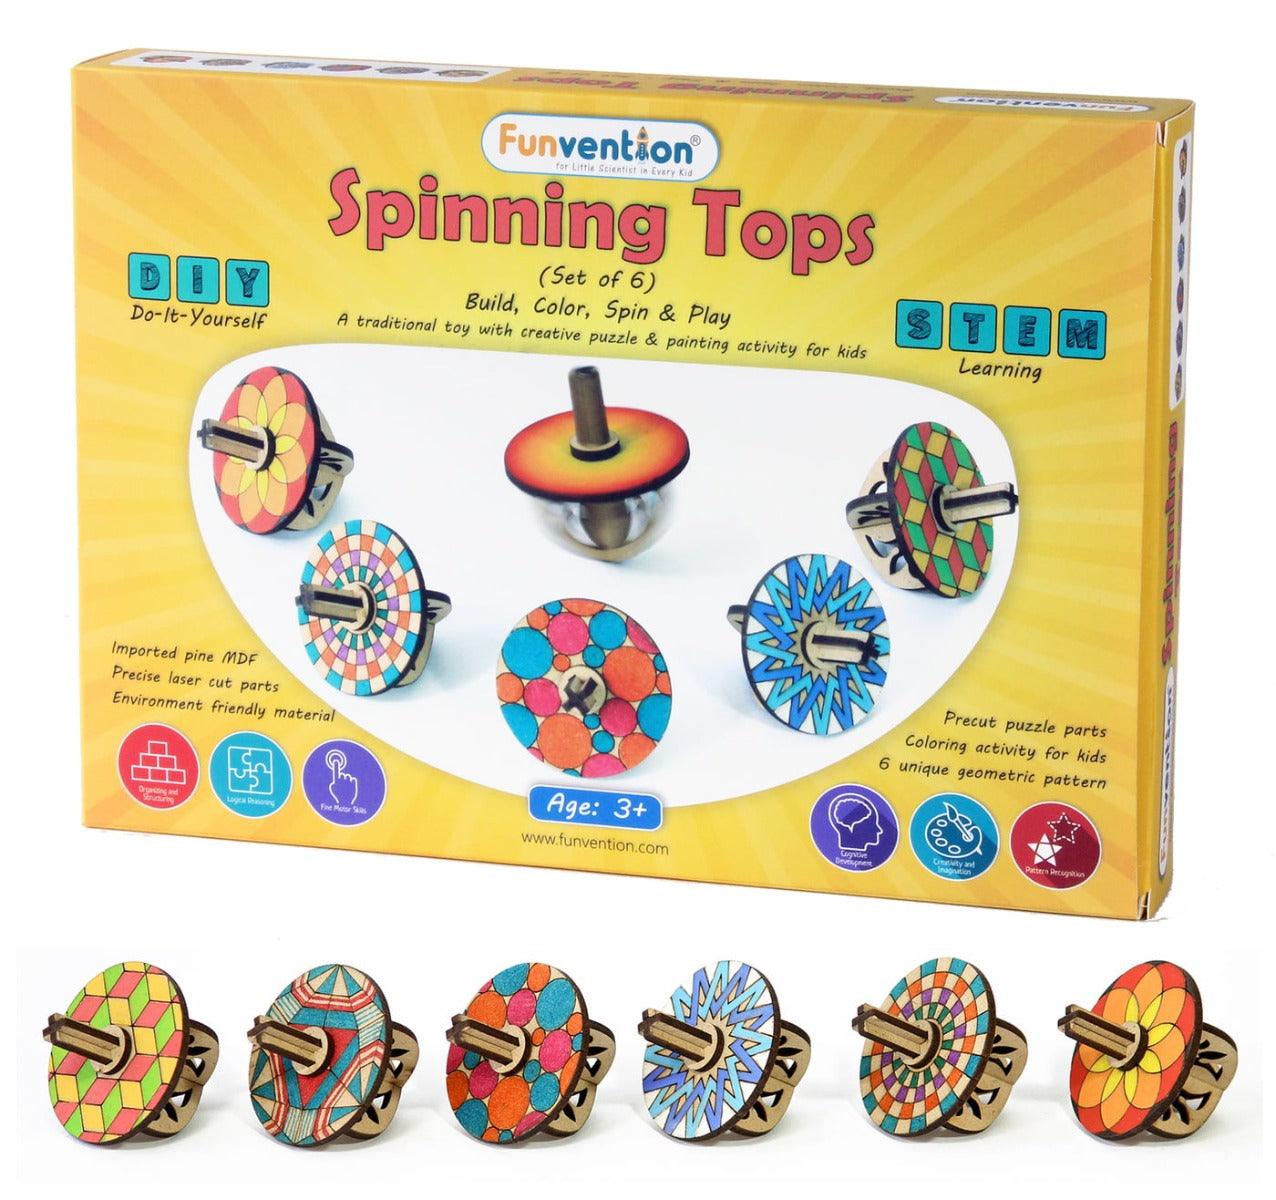 Funvention Spinning Tops (Geometric Patterns) - Set of 6 DIY Spinning Tops and Coloring Activity